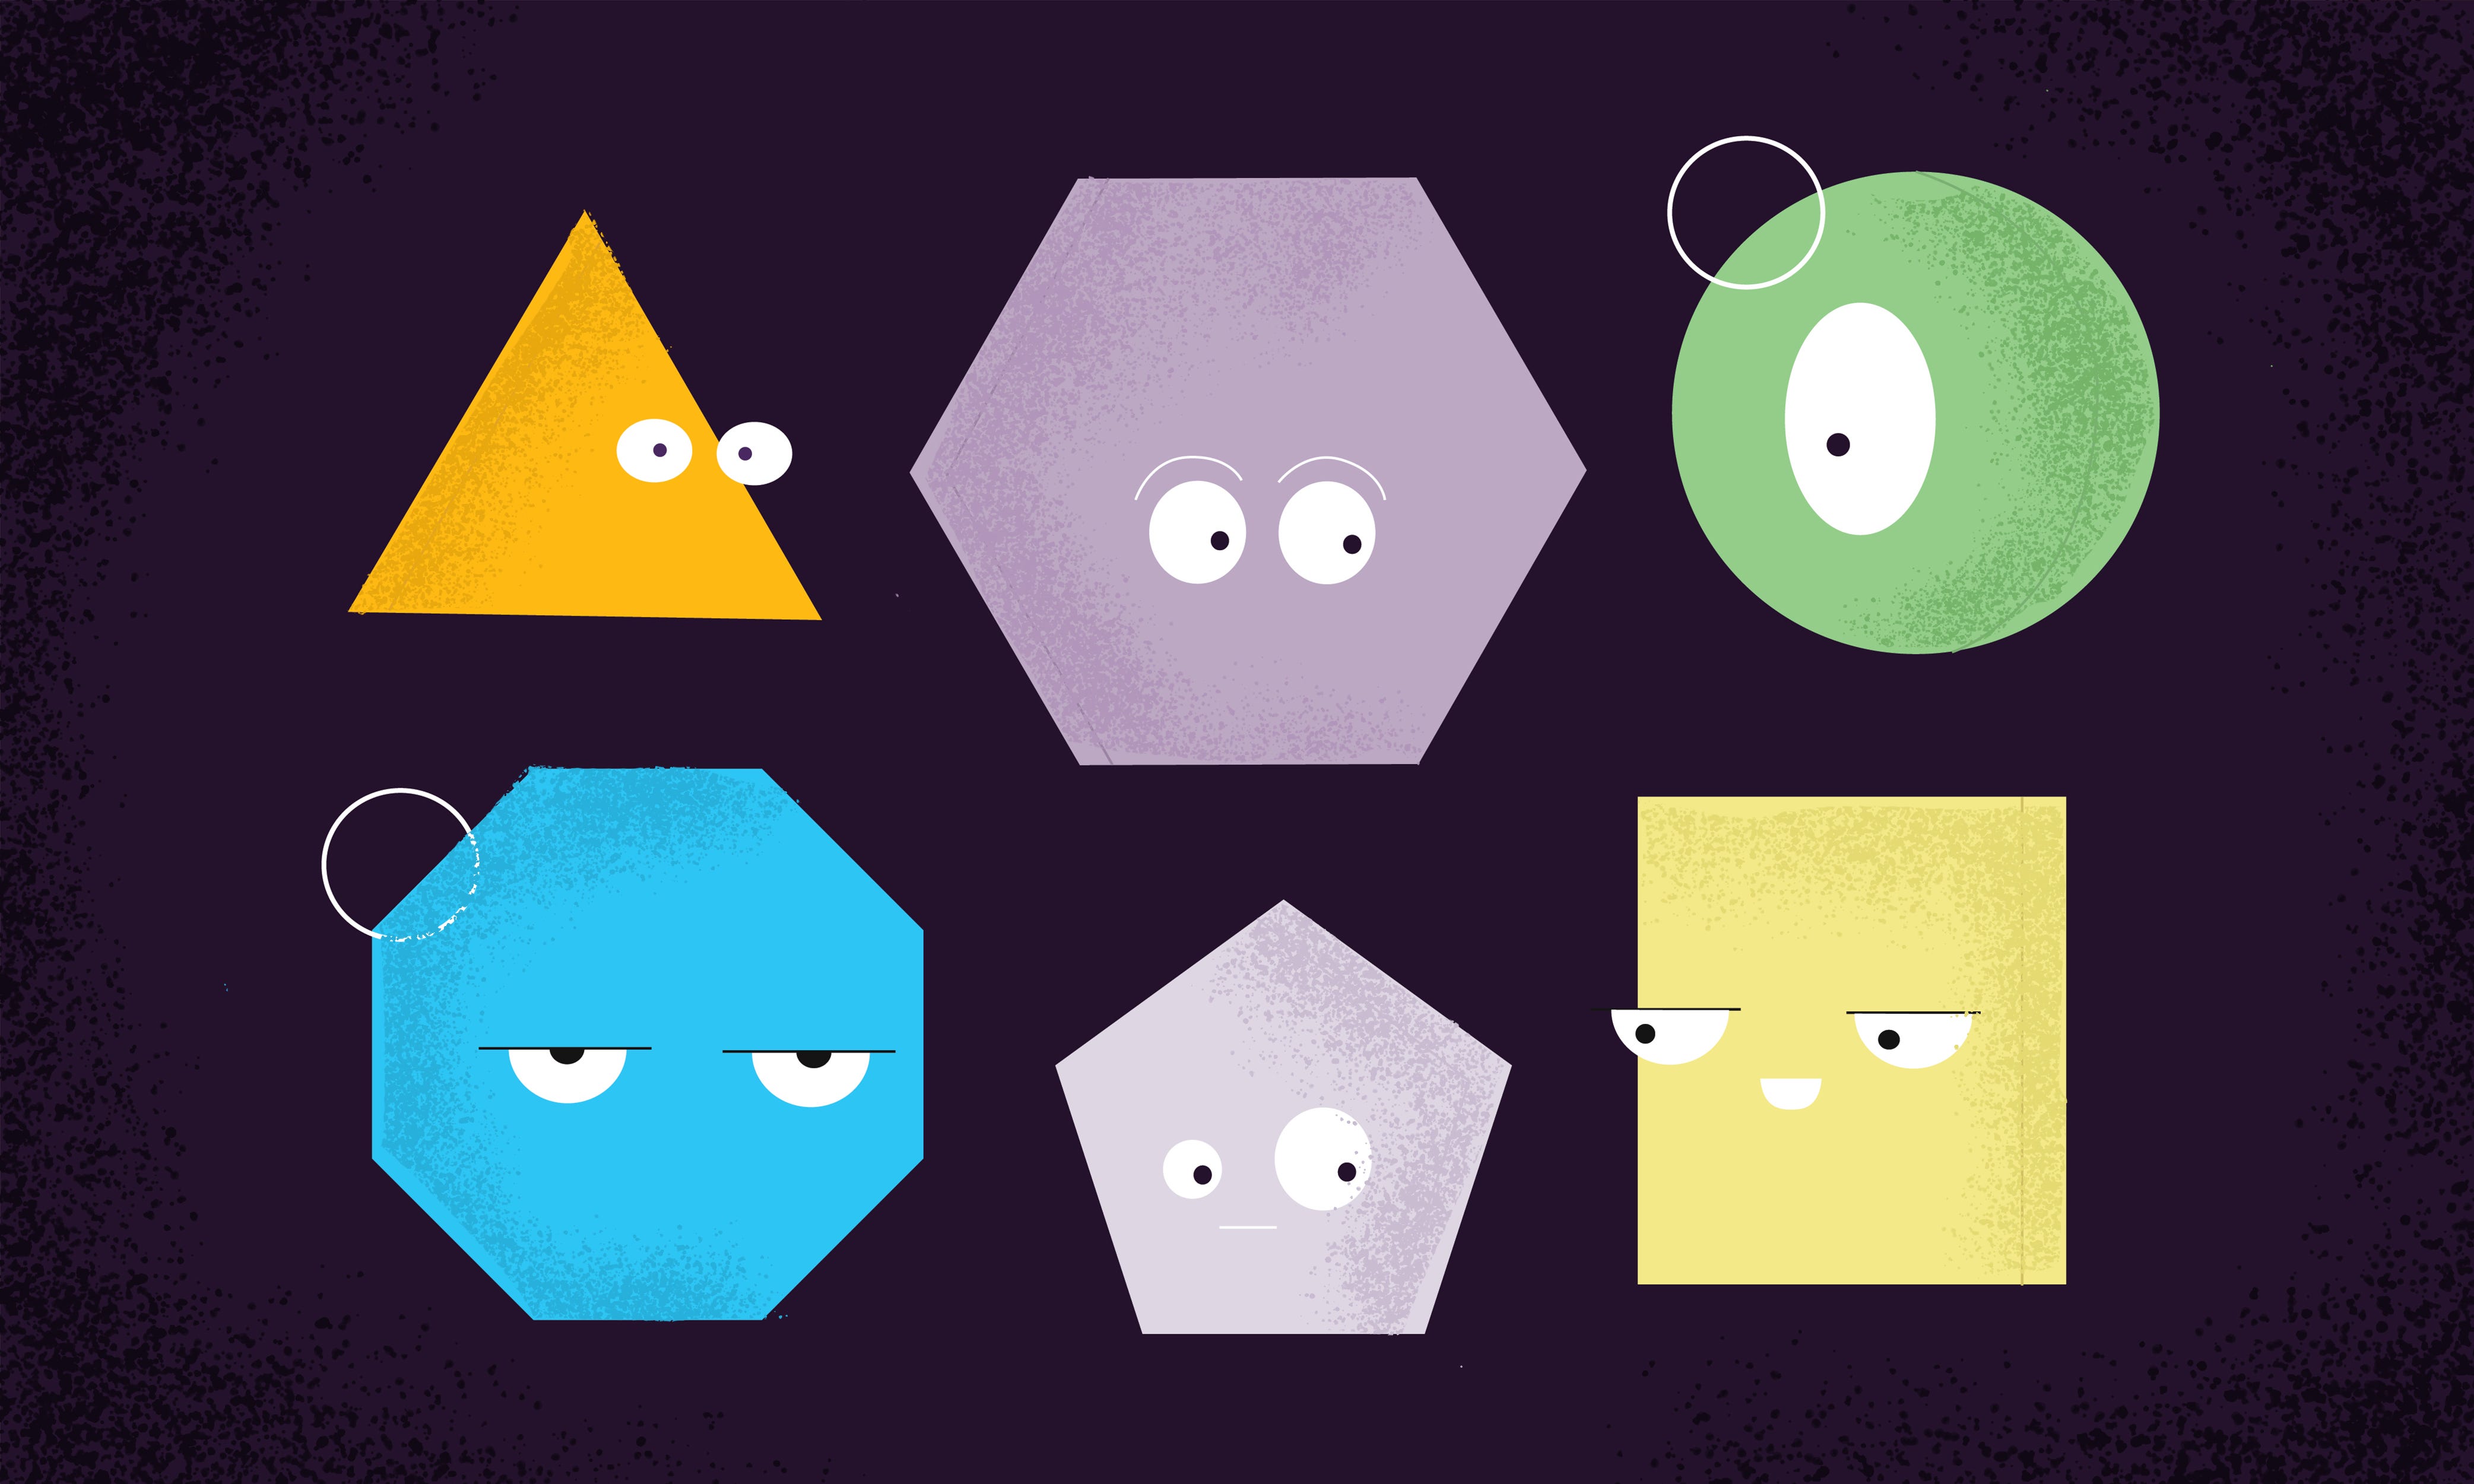 Psychology of shapes in Design: how different shapes can affect